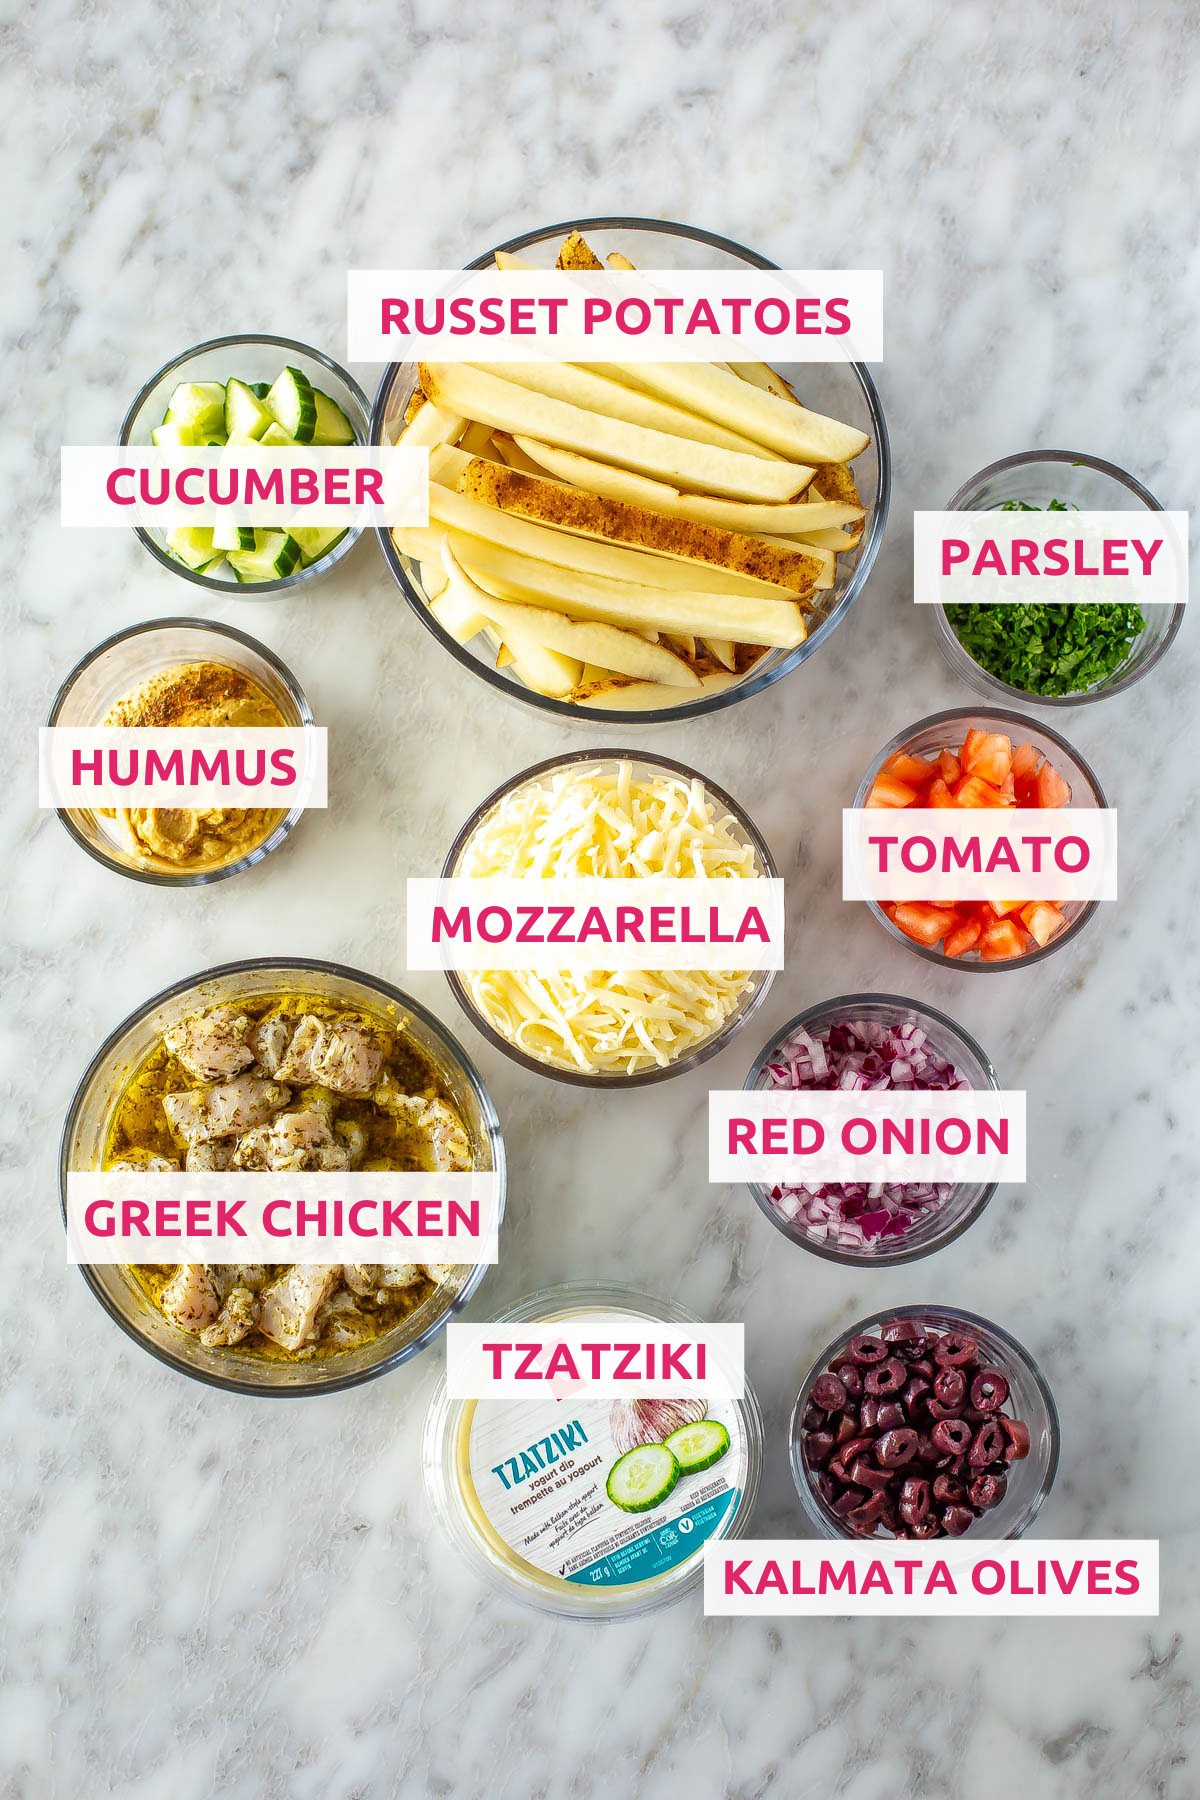 Ingredients for Greek fries: russet potatoes, cucumbers, hummus, Greek chicken, mozzarella, olives, tzatziki, red onion, tomato and parsley.